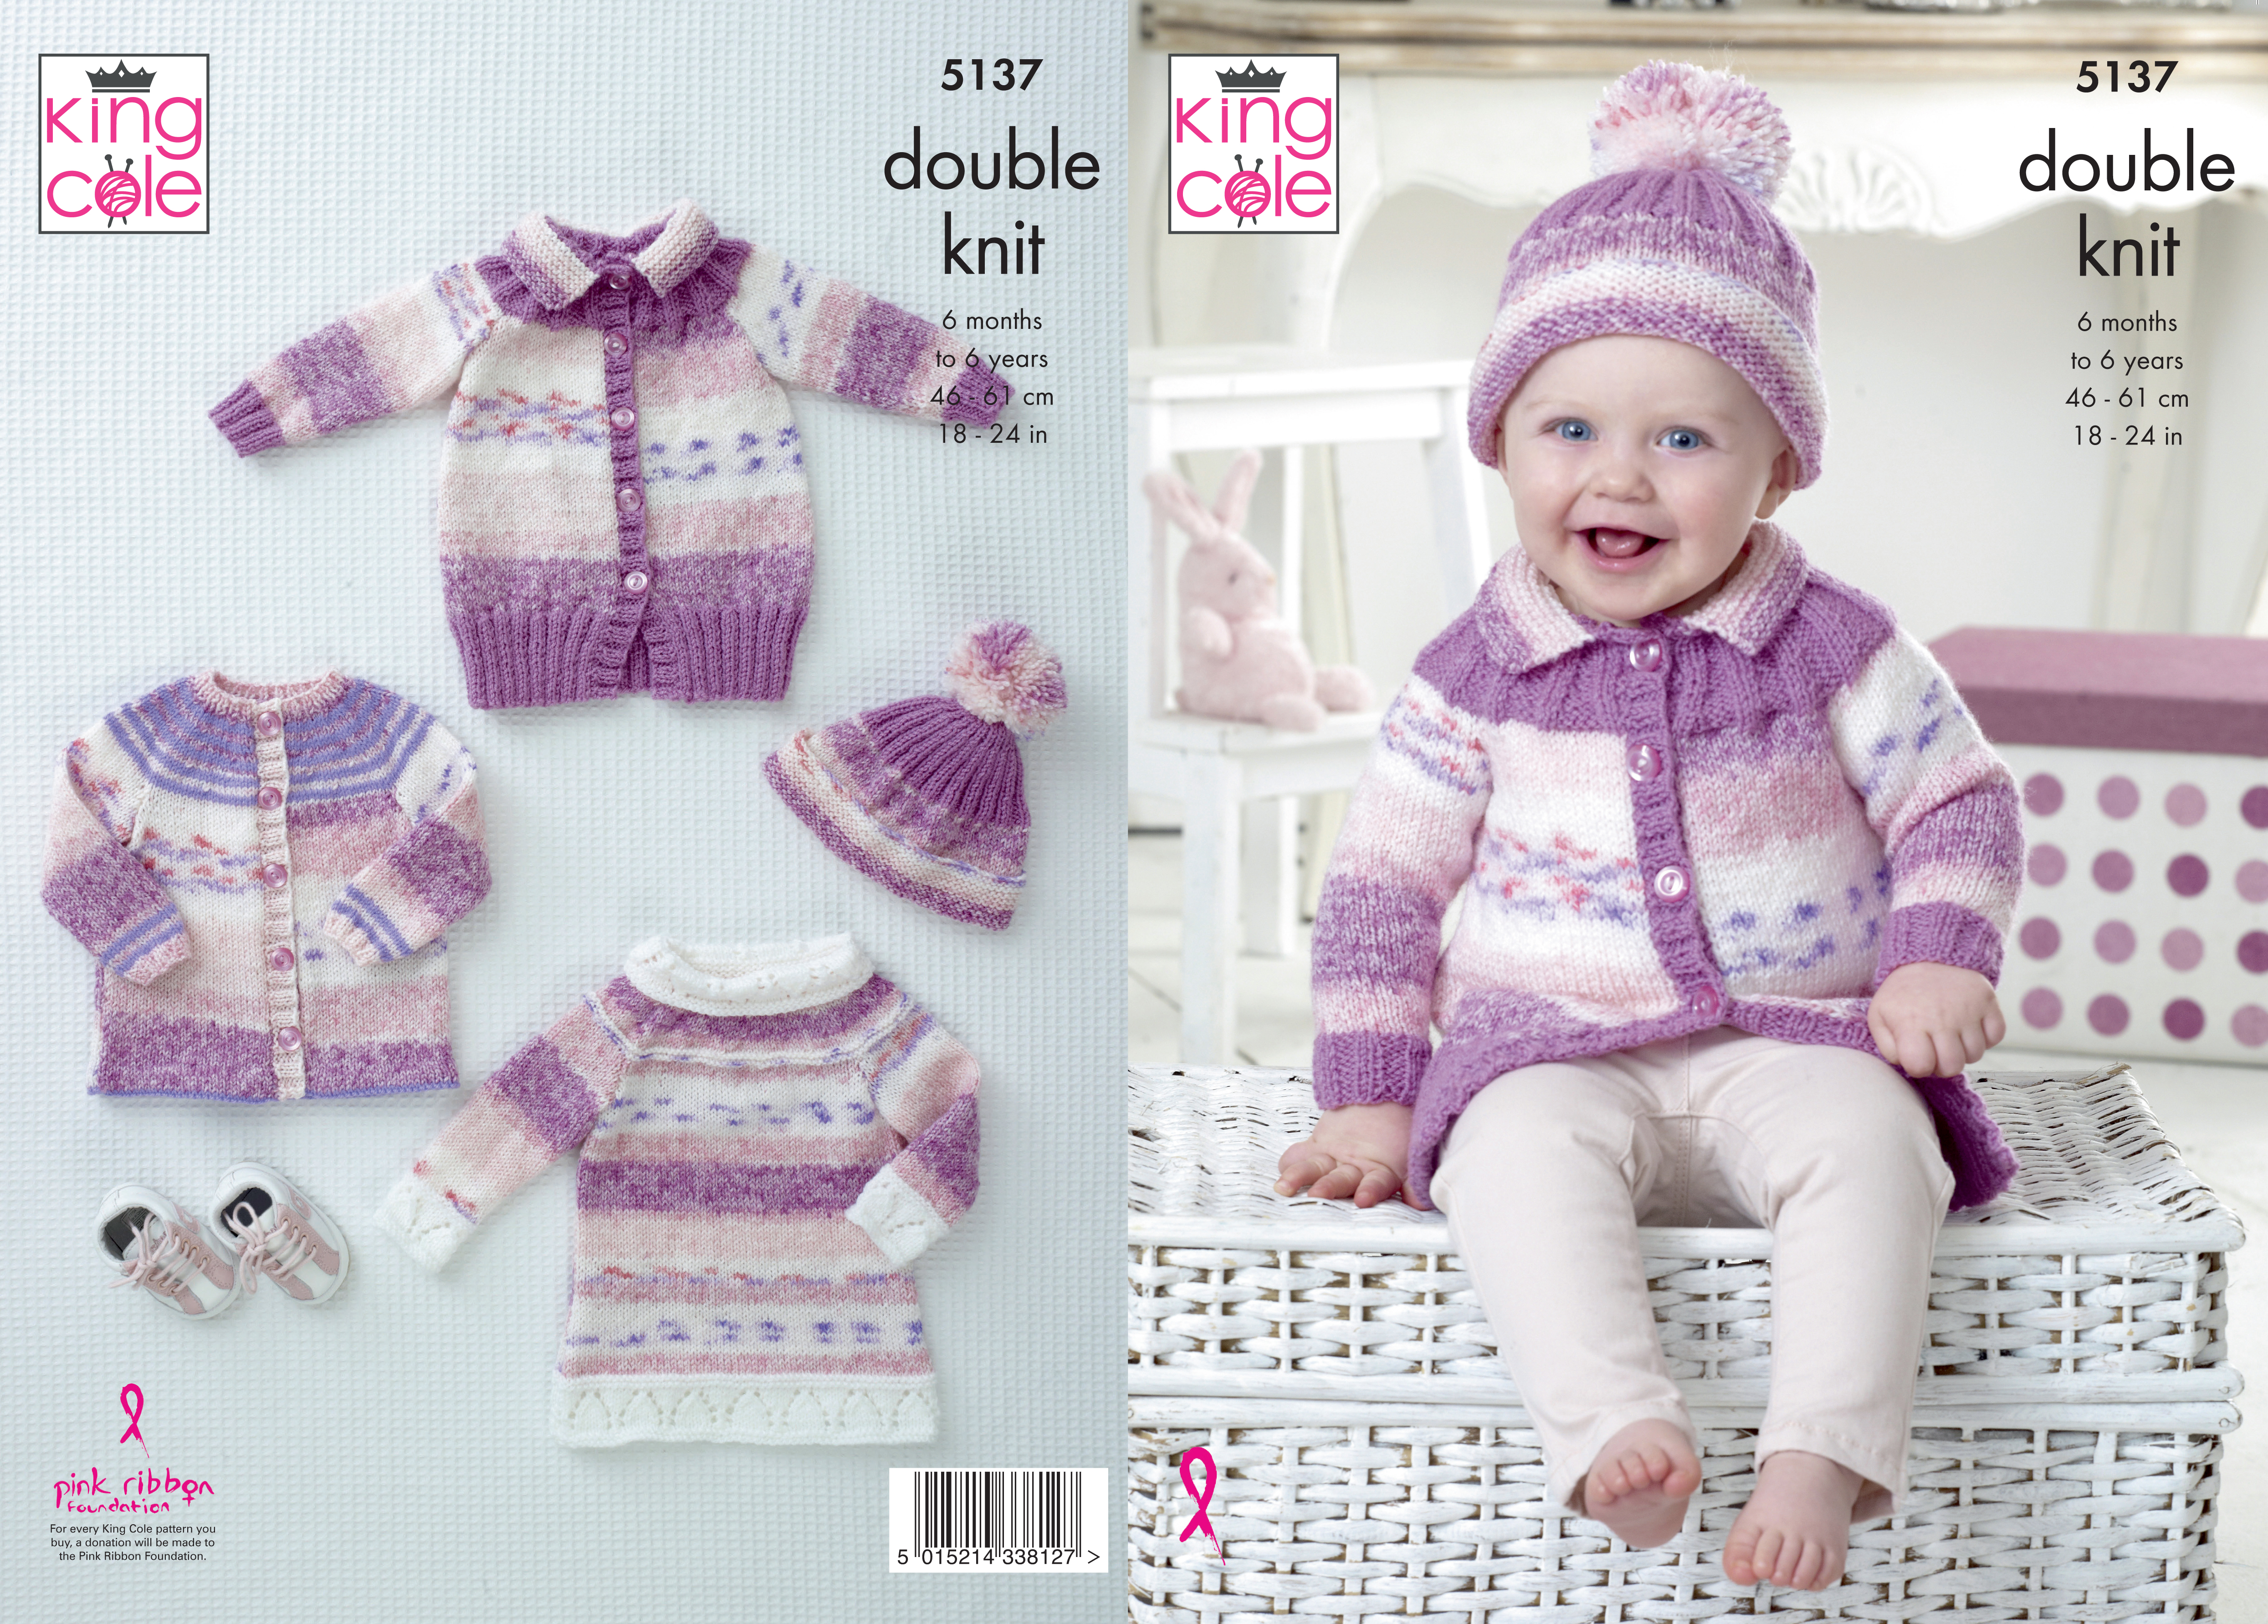 Cardigan, Coat, Tunic & Hat Knitted in Splash DK 5137 x3 - Click Image to Close